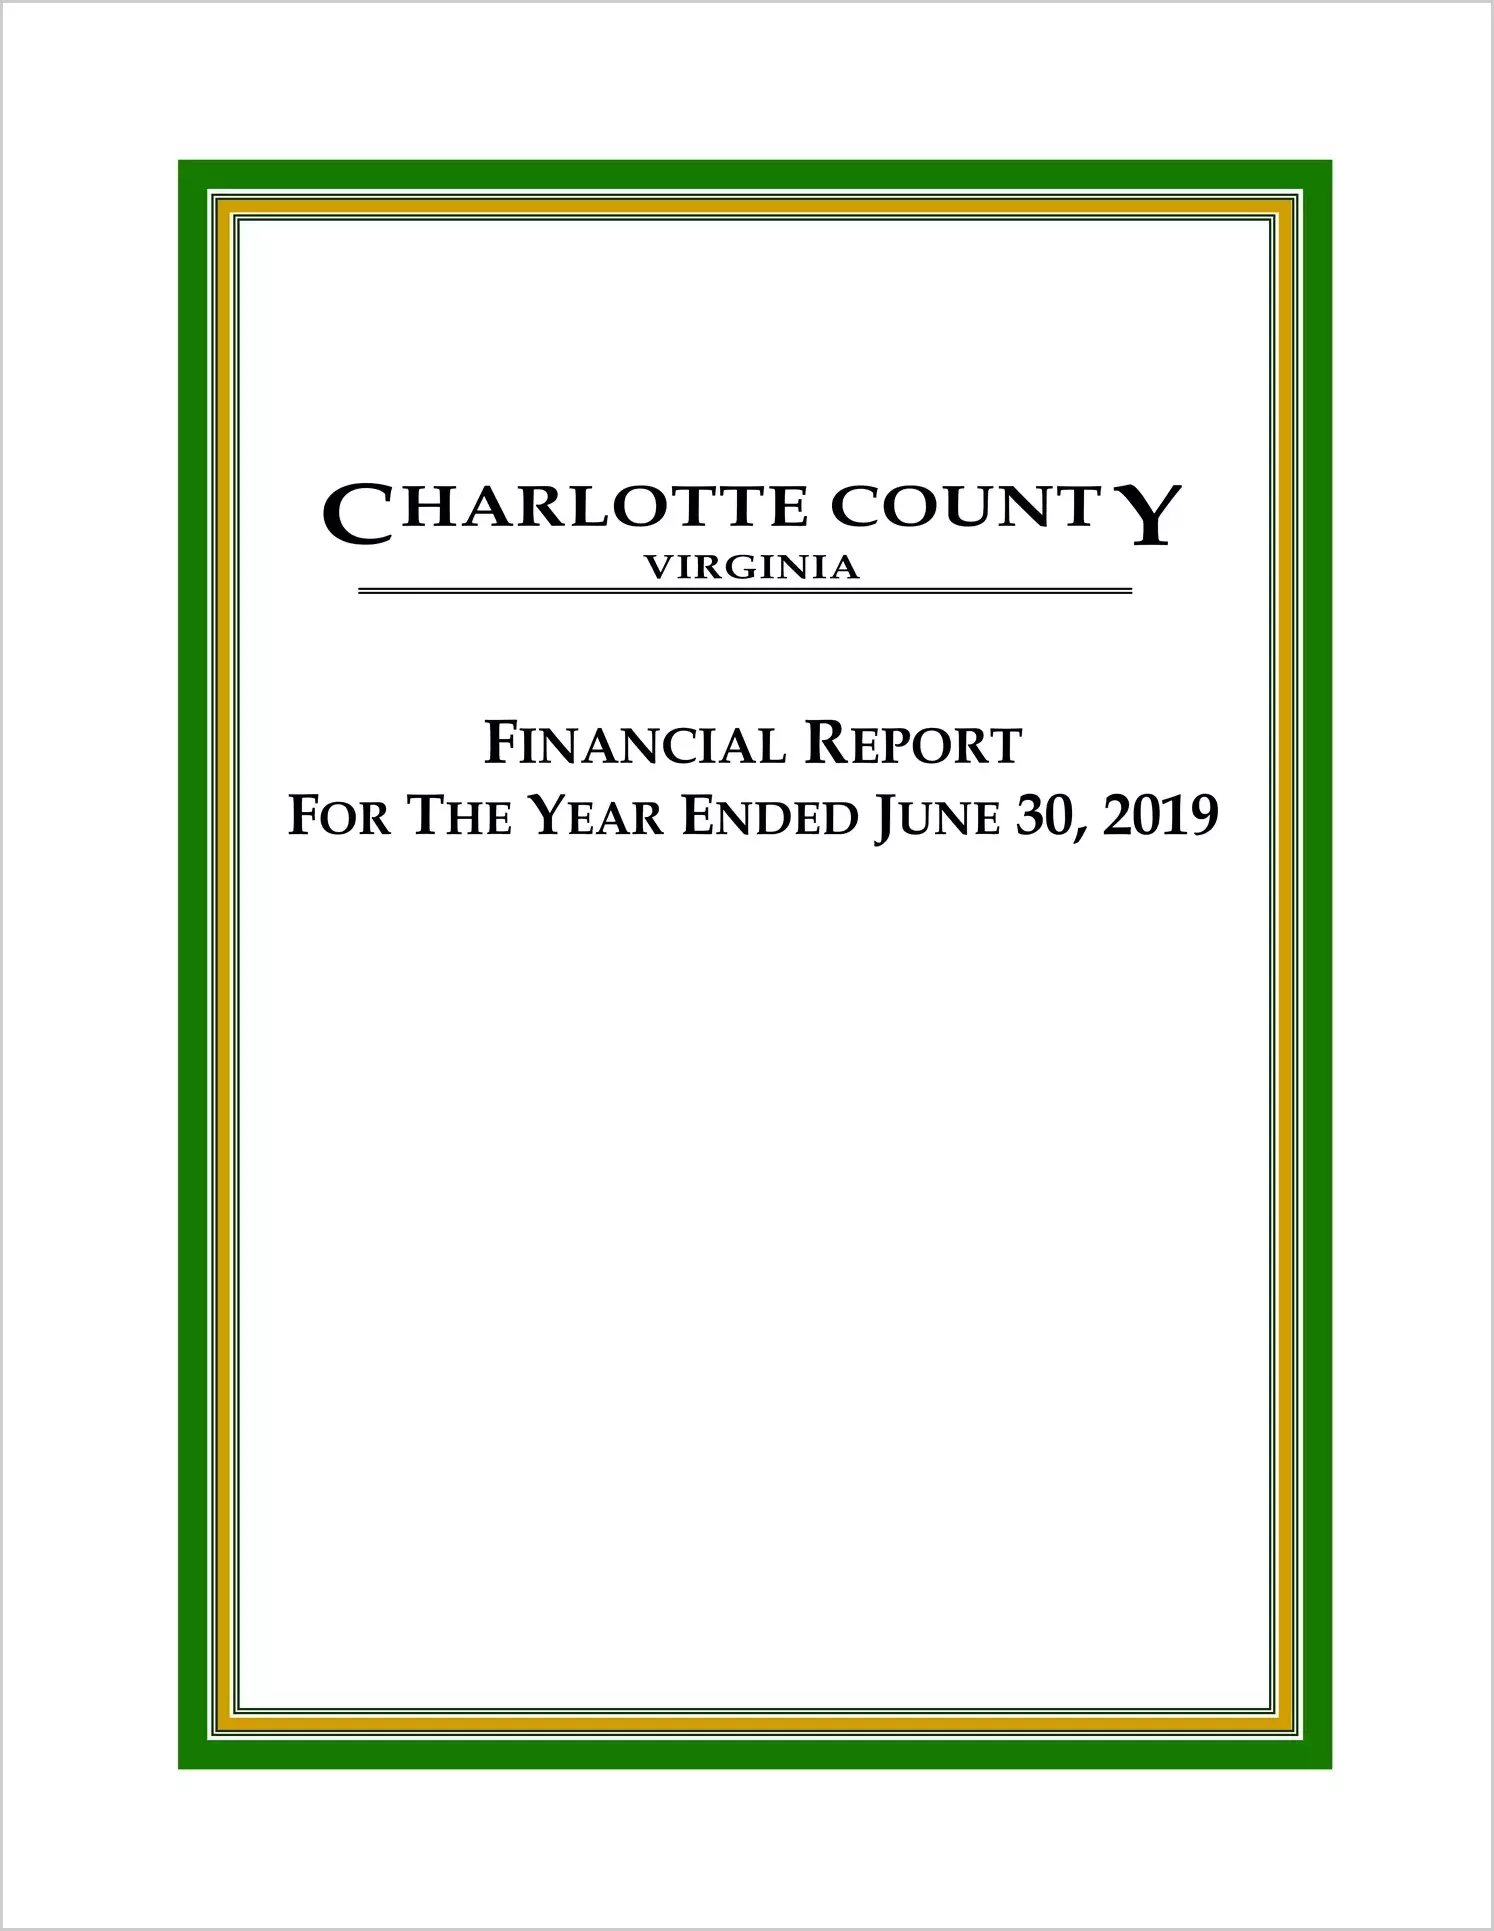 2019 Annual Financial Report for County of Charlotte